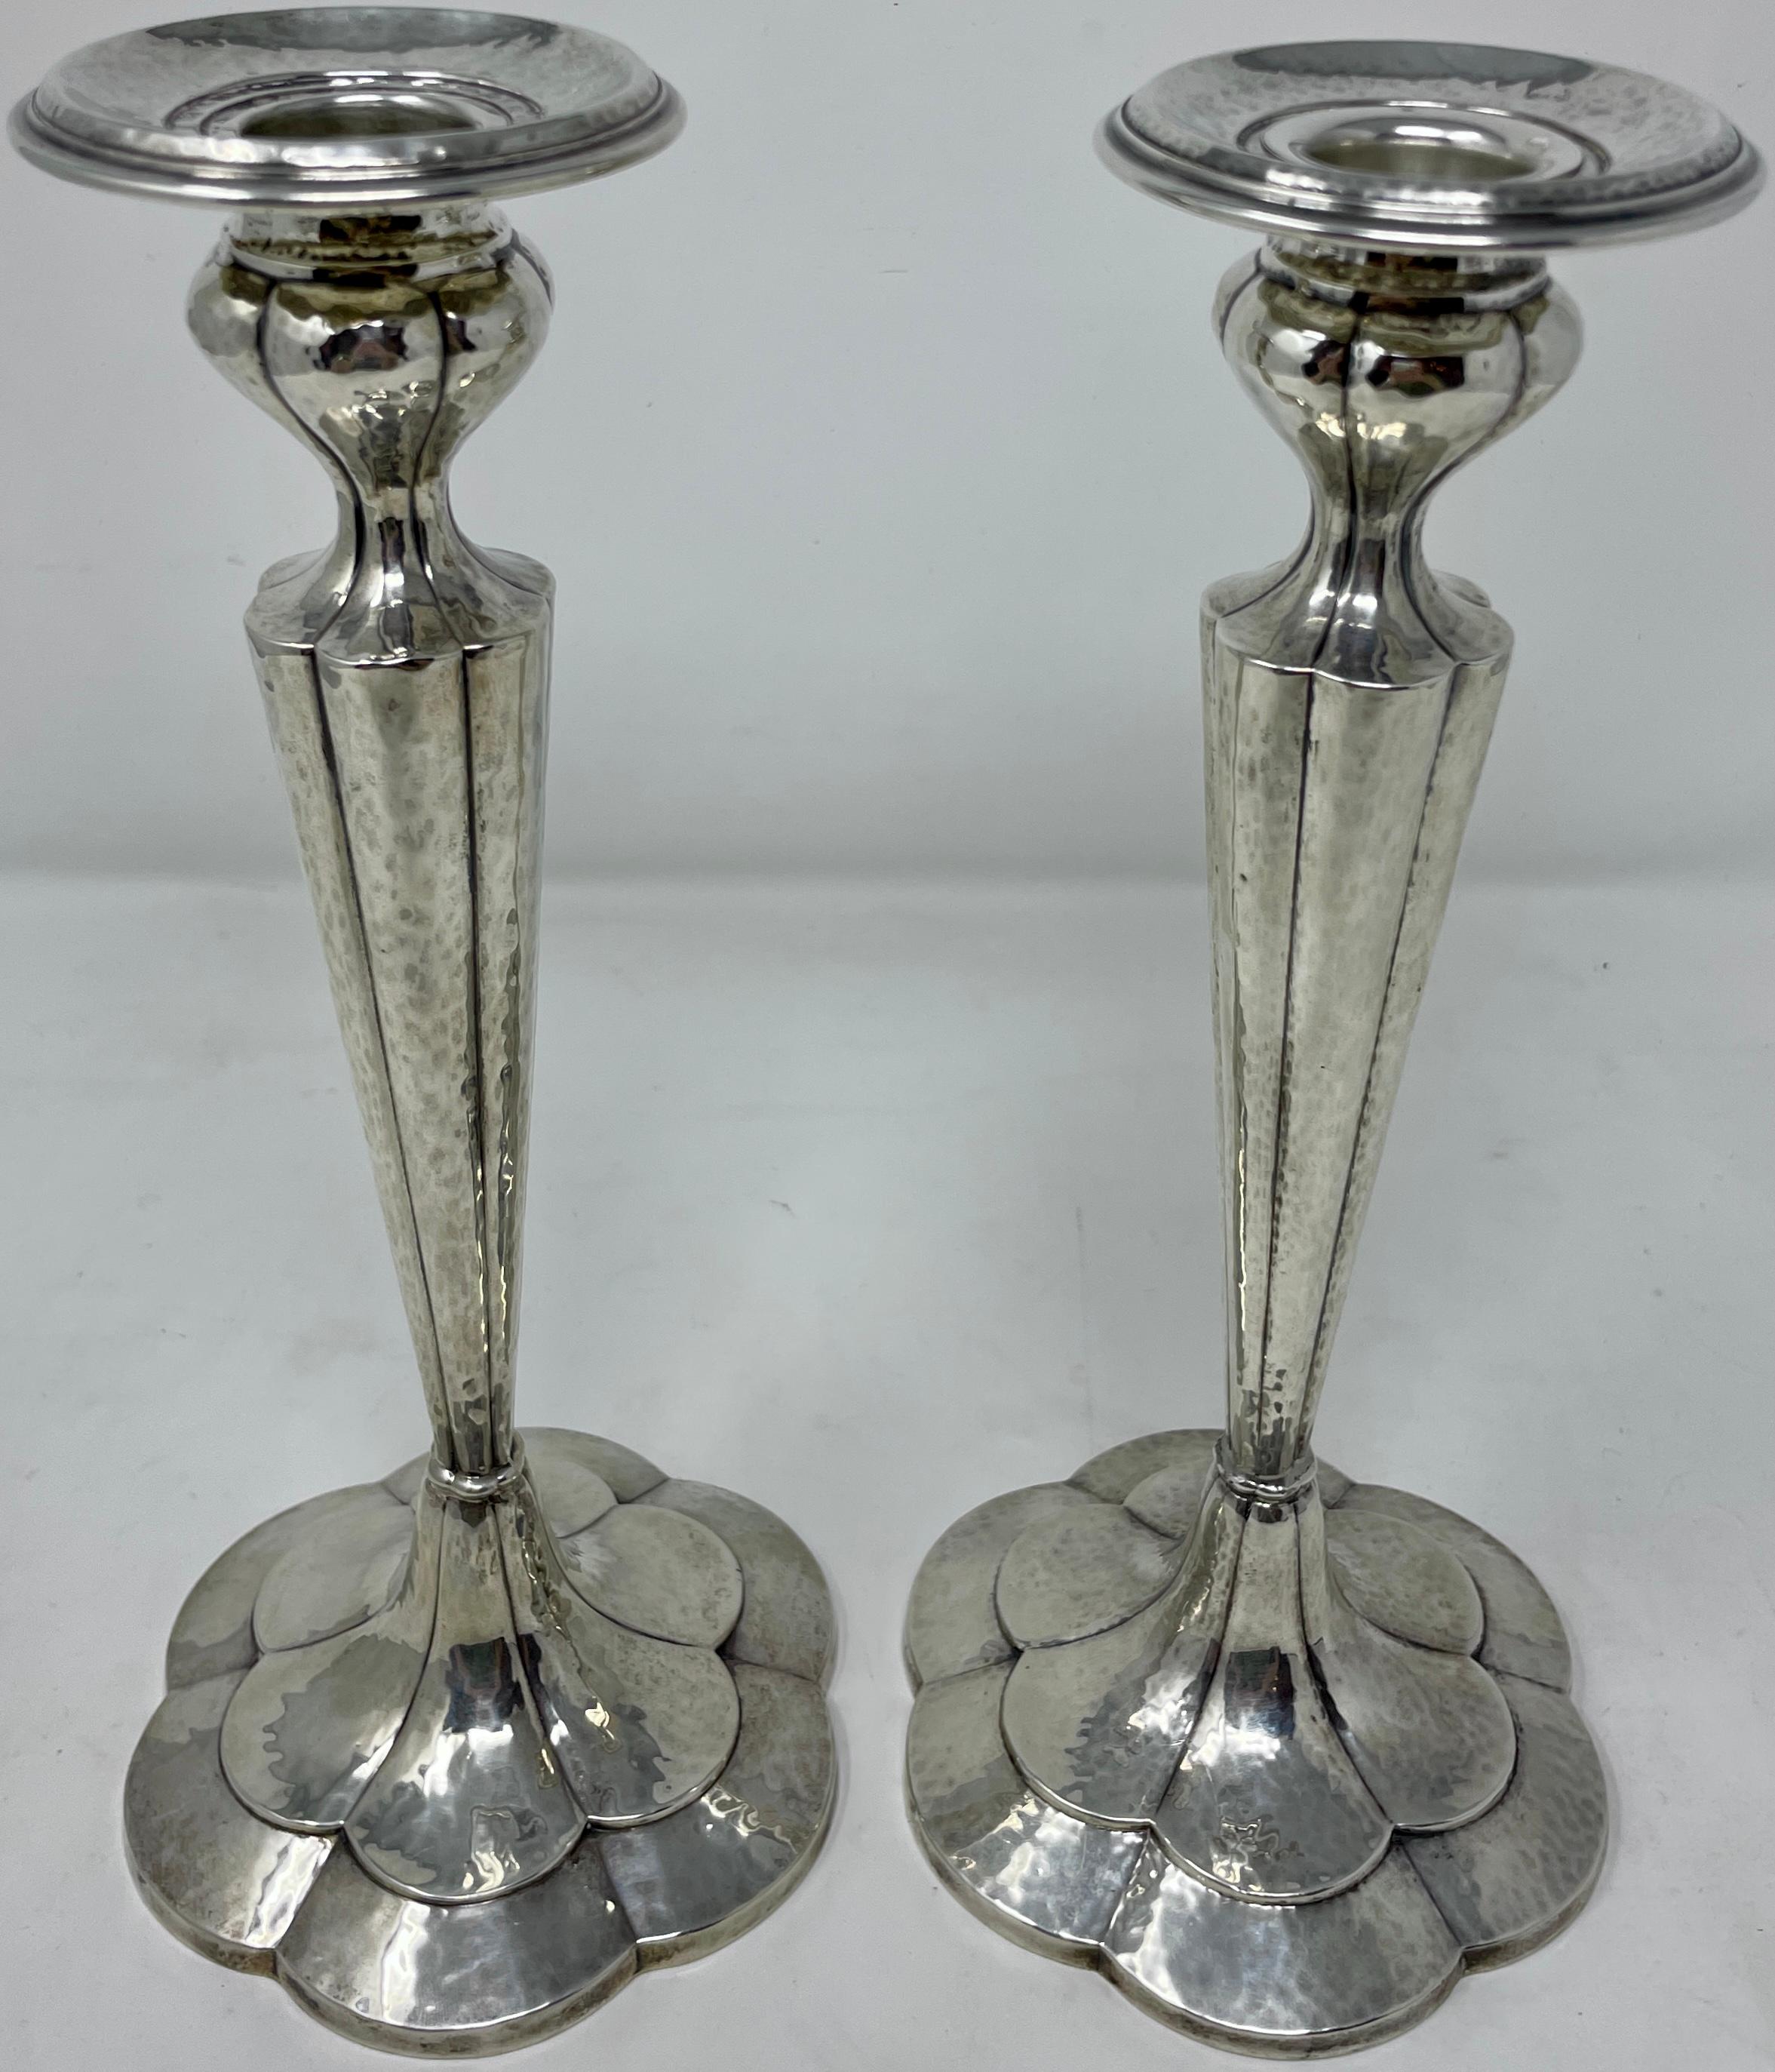 Pair Antique American J.S. & Co. Sterling Silver candlesticks, circa 1900.